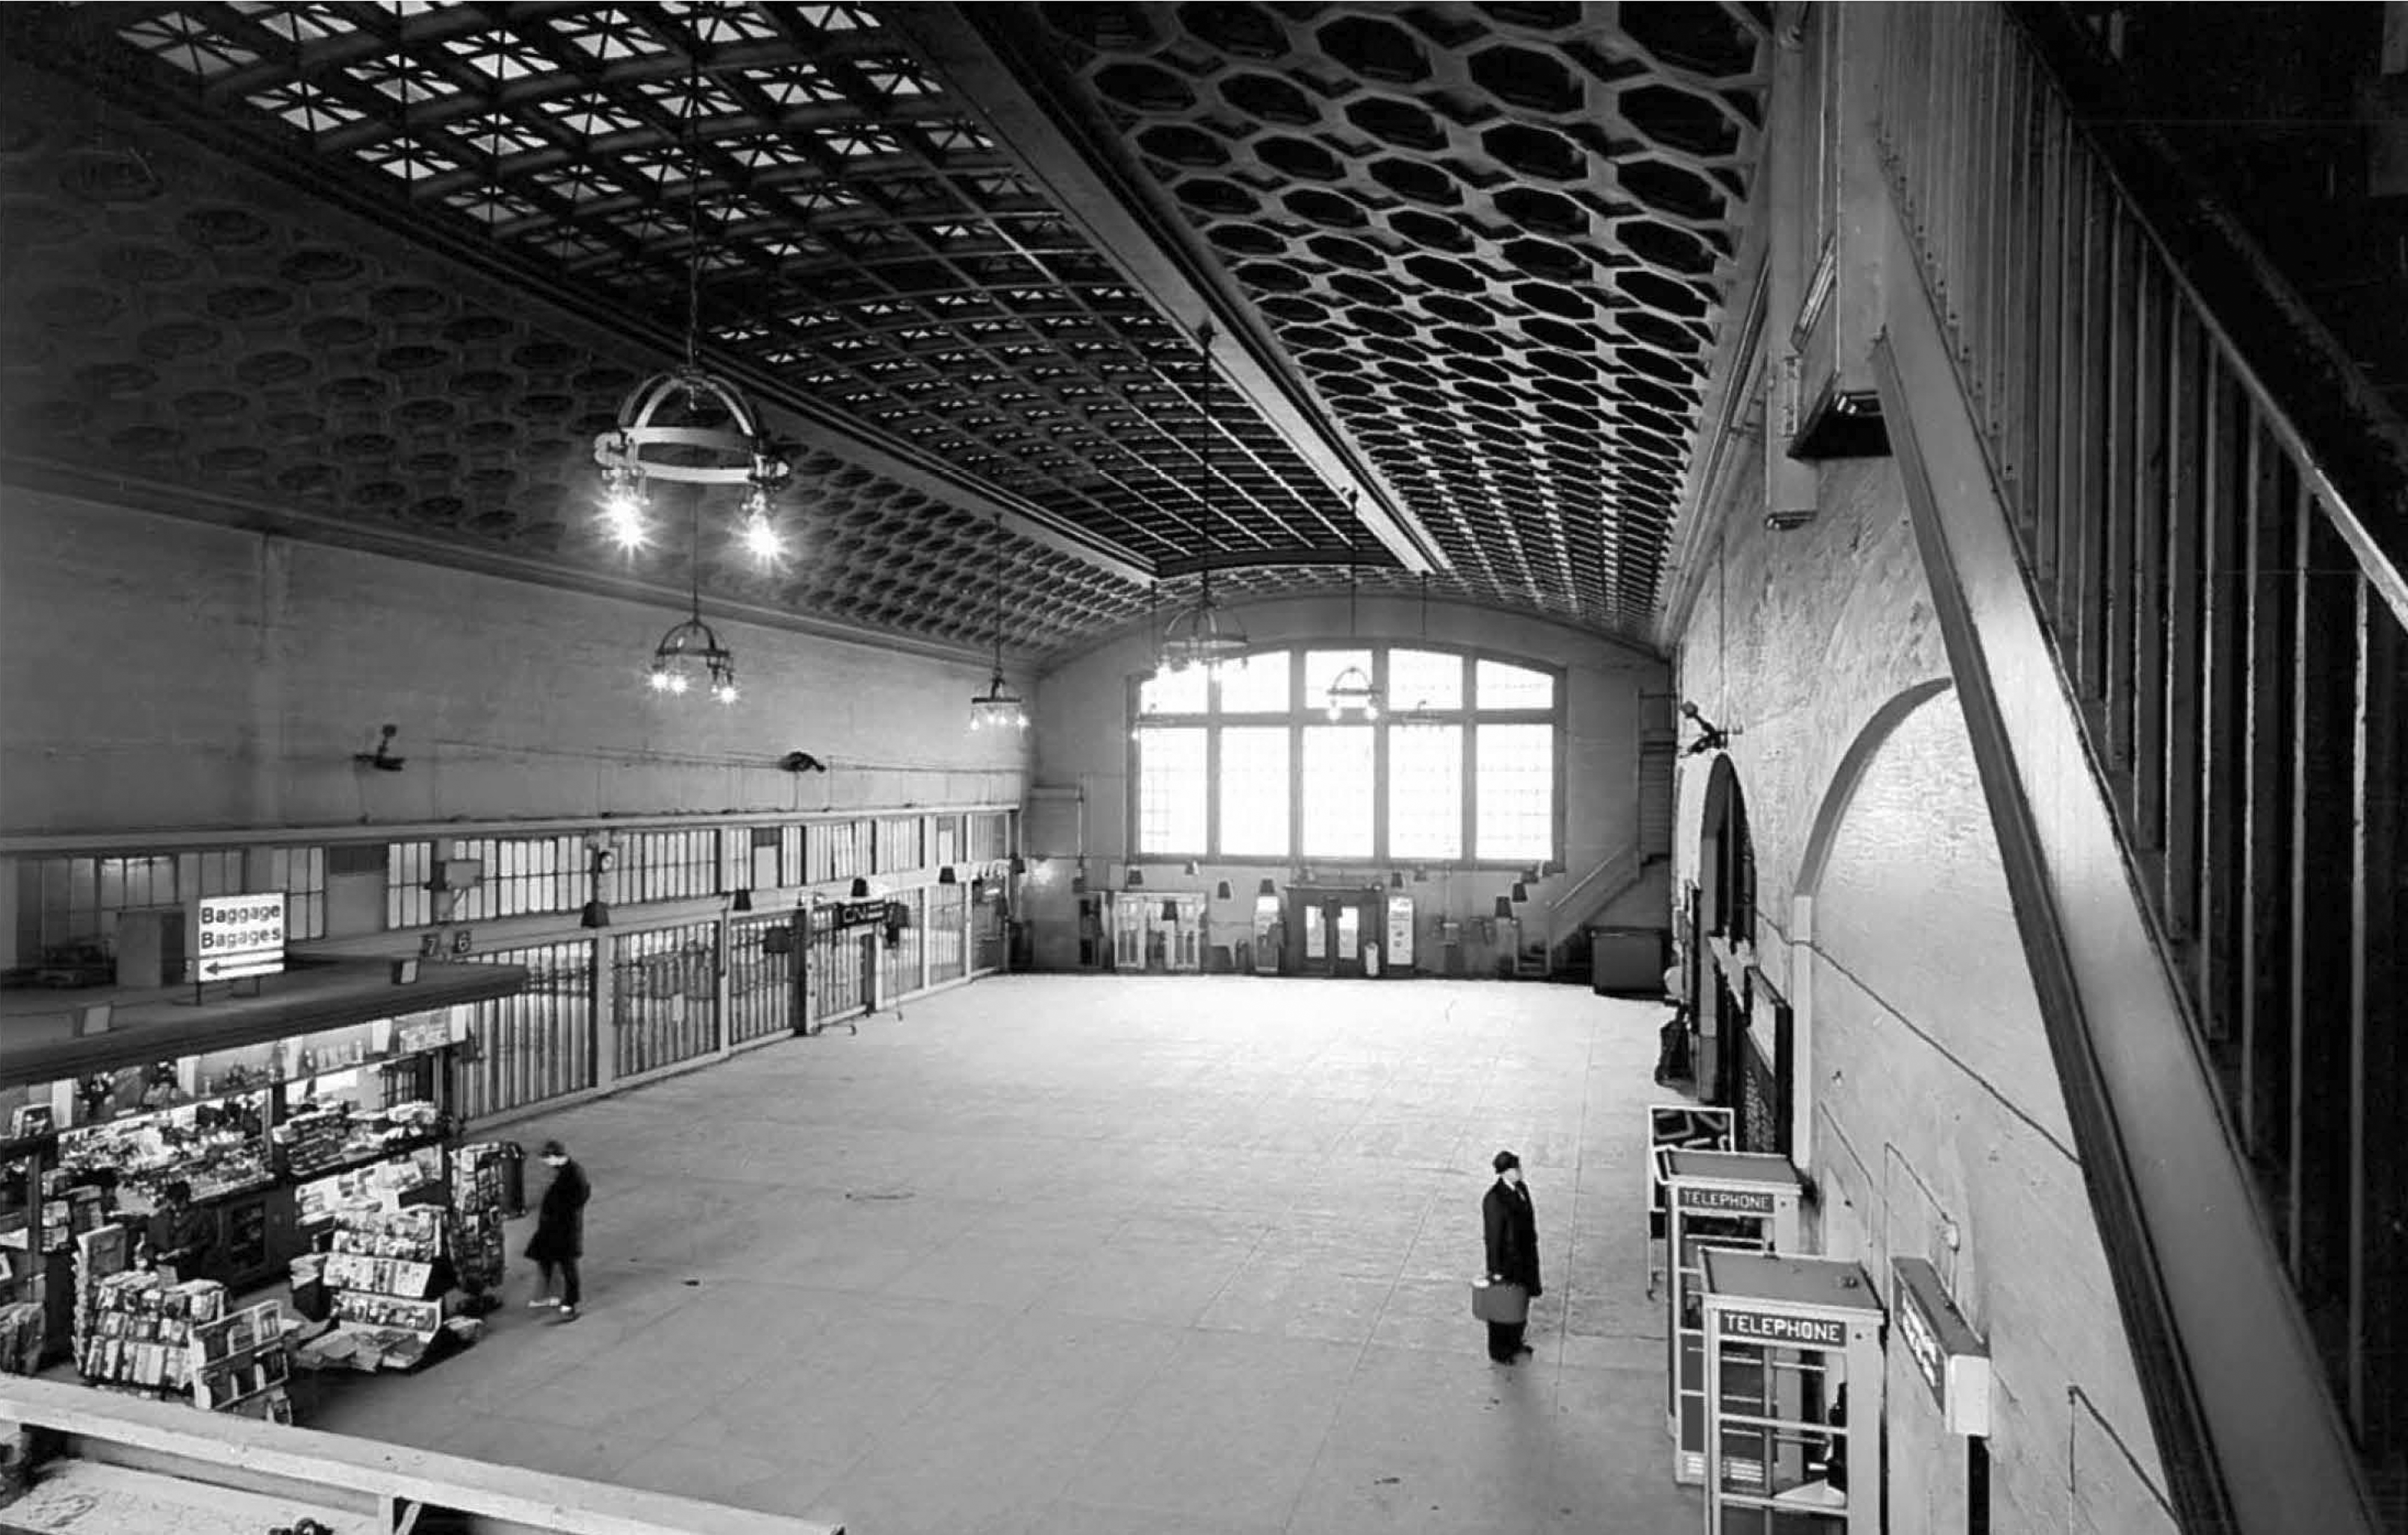 The concourse was the last chance for passengers to buy a magazine or make a phone call before boarding their train. The high-ceilinged hall became the temporary Senate Chamber in 2019.